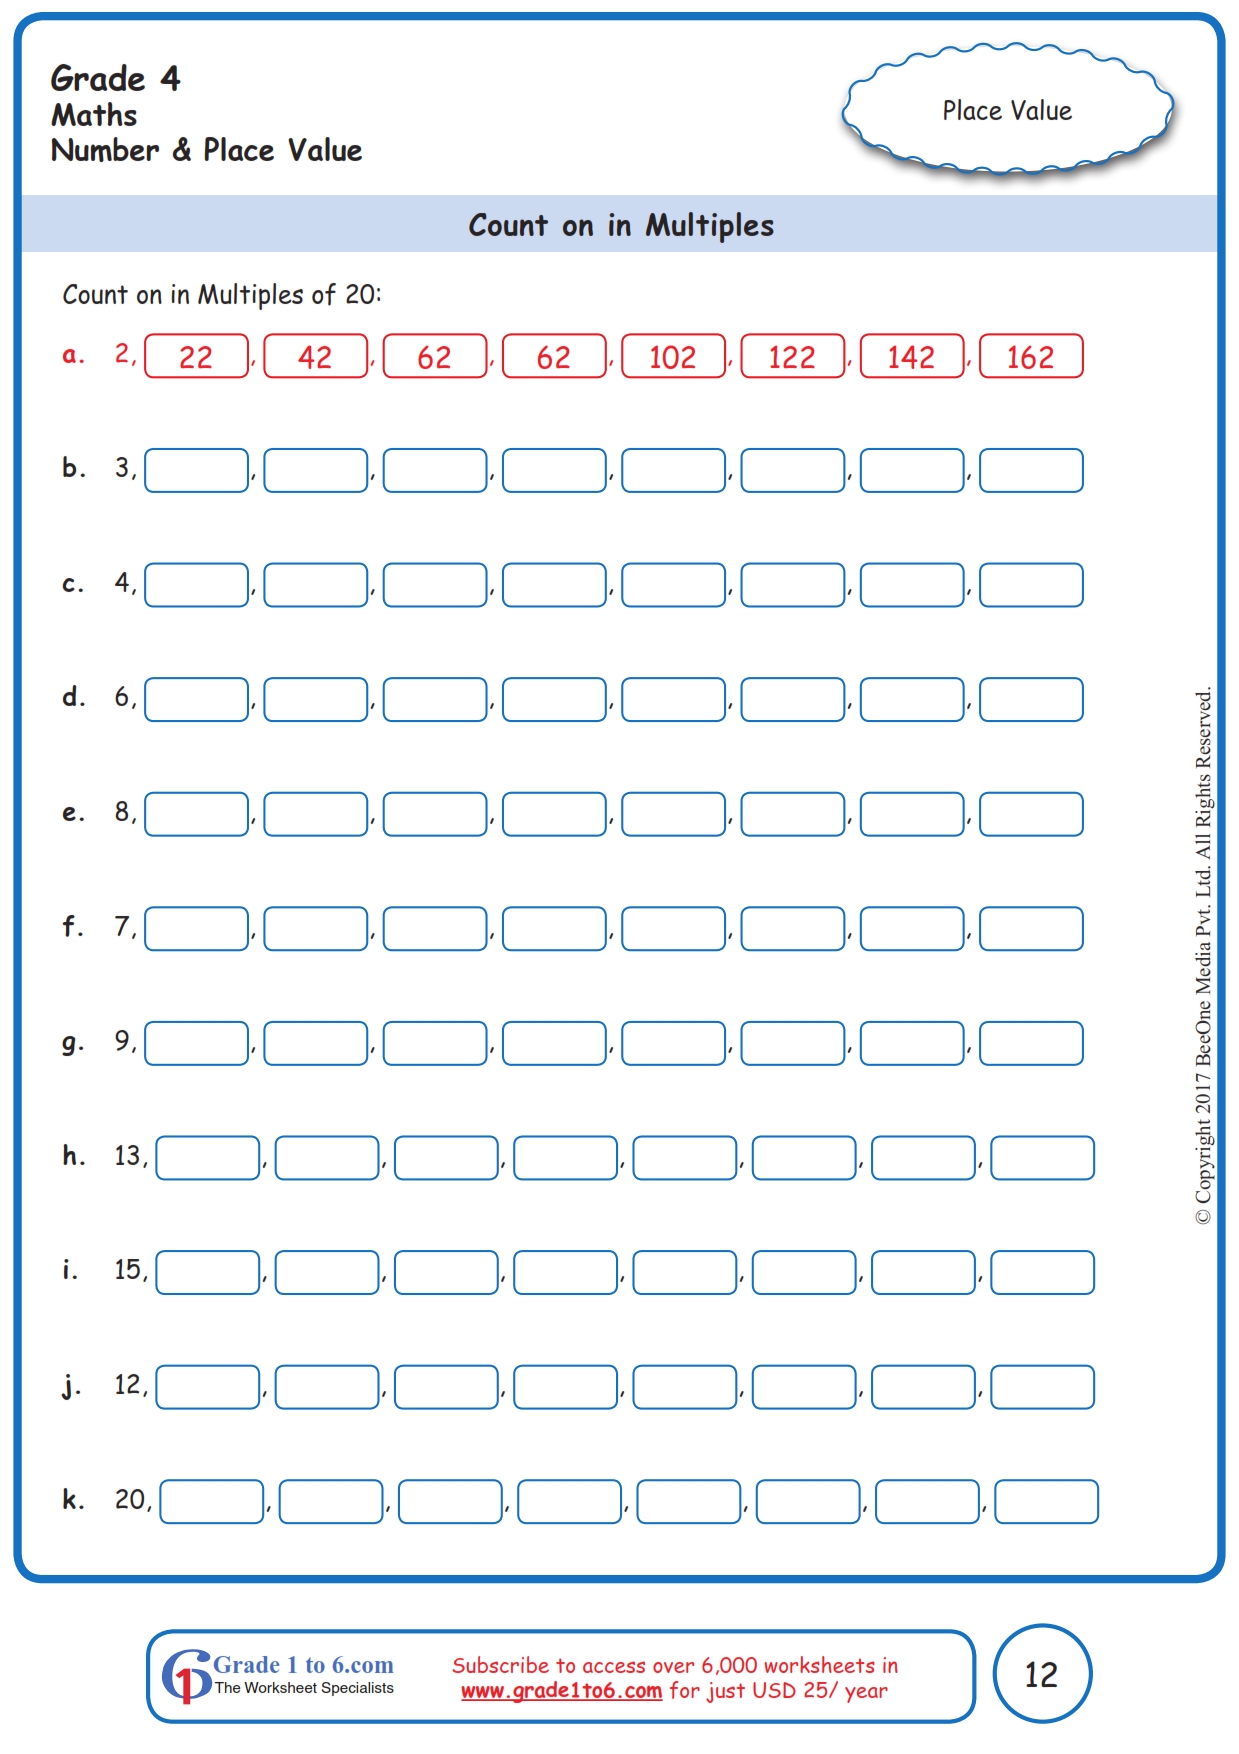 Counting In Multiples Of 10 Worksheets www grade1to6